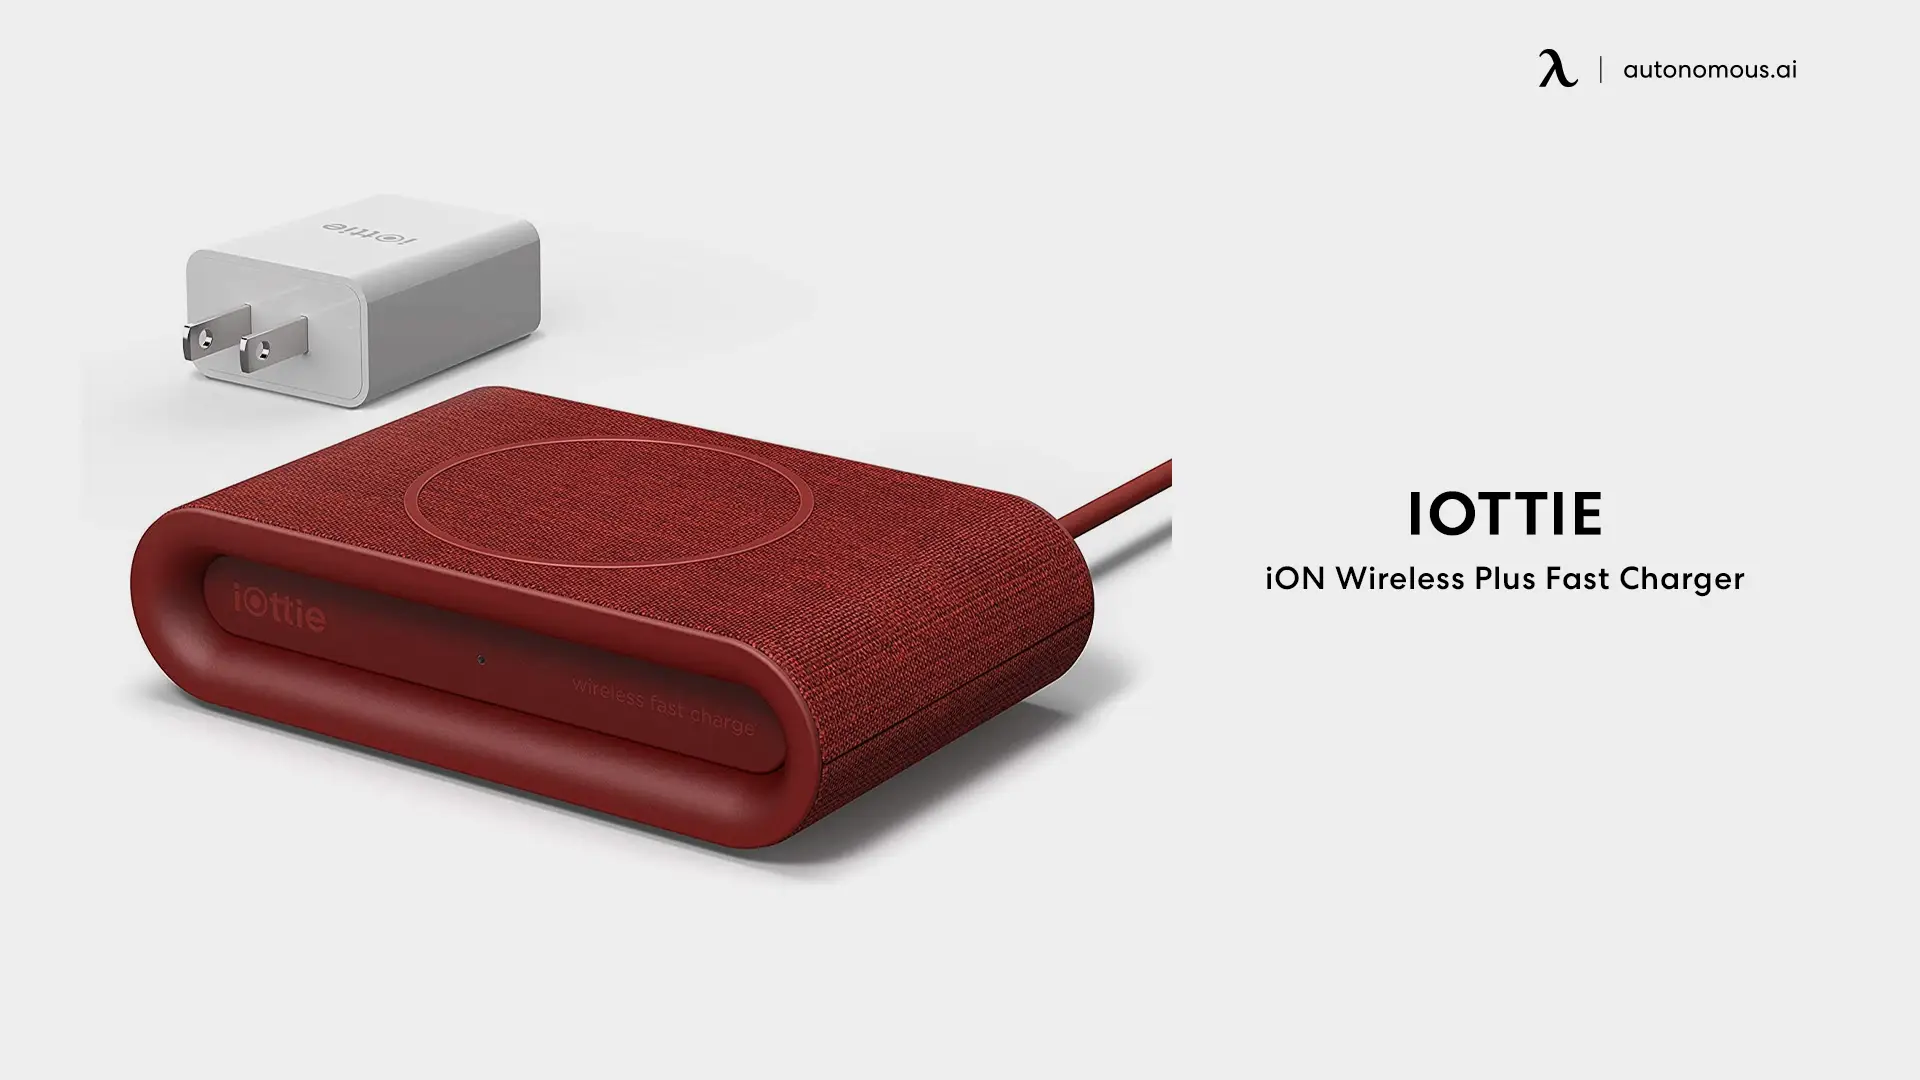 iOttie iON Wireless Plus Fast Charger